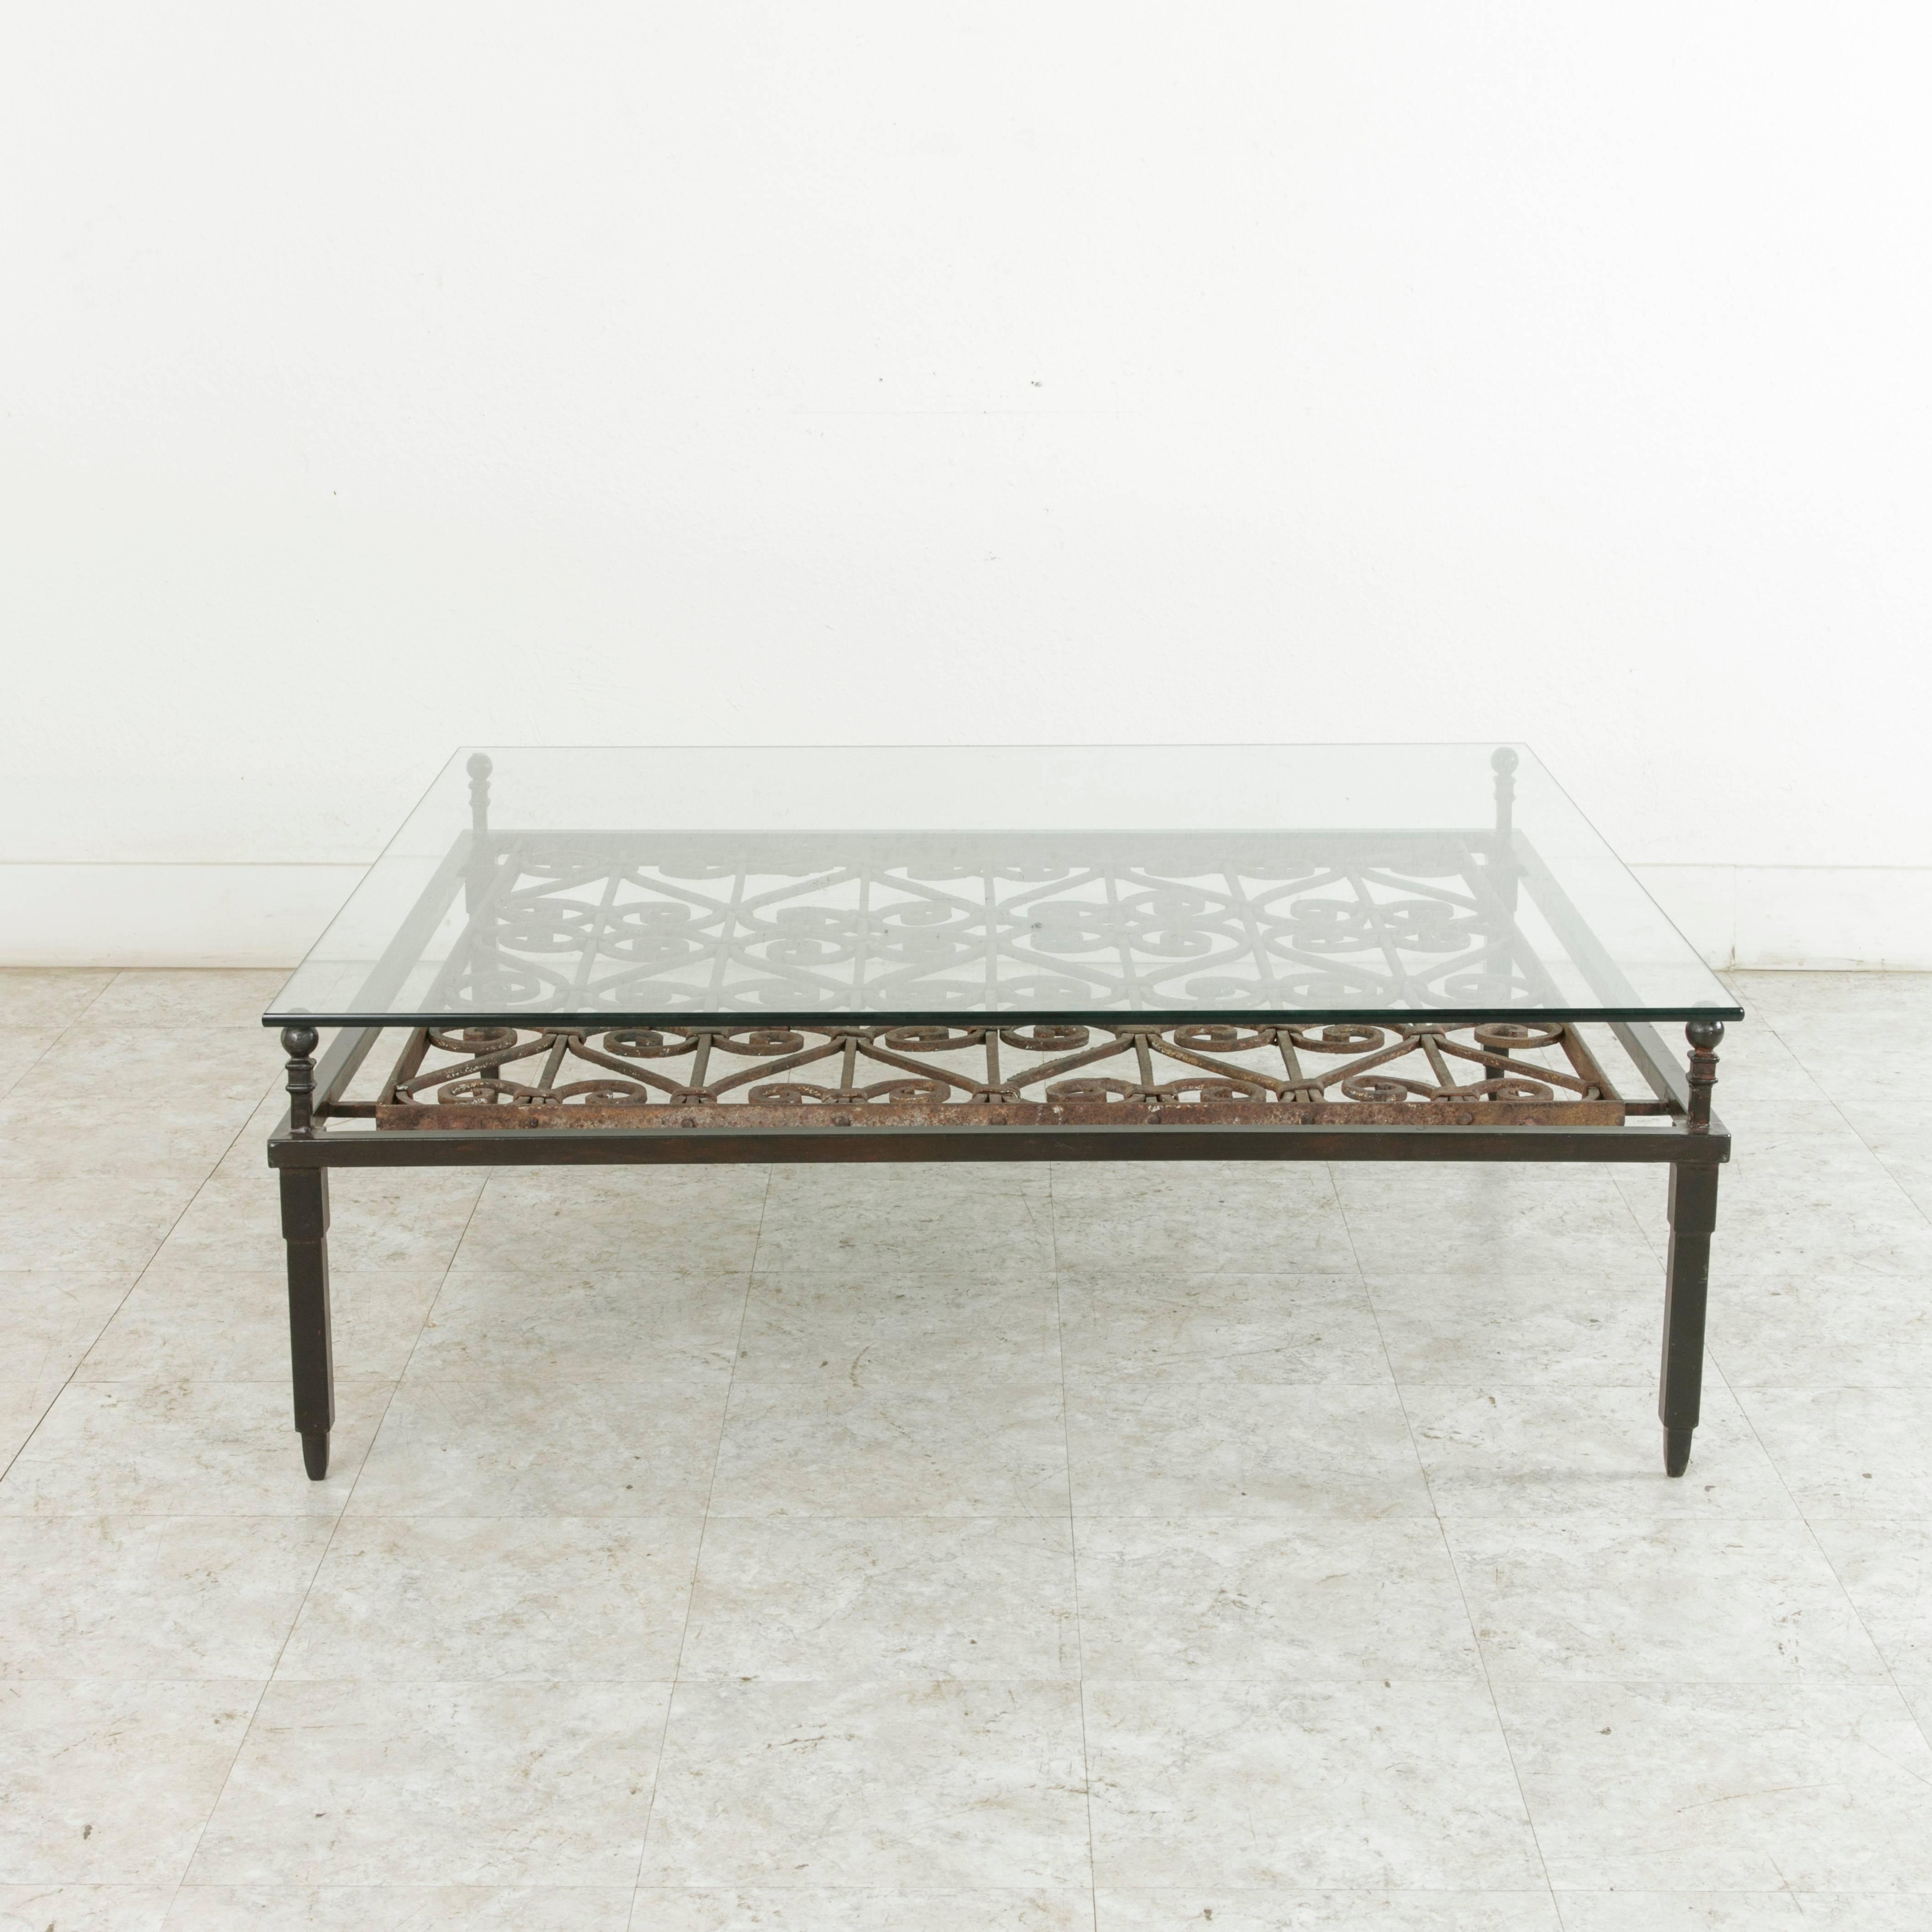 This very large glass top coffee table or garden table measures 48 inches in length and 46 inches in width and features a late eighteenth century hand forged iron grill. The glass top, mounted on the four legs rising above the iron frame, highlights